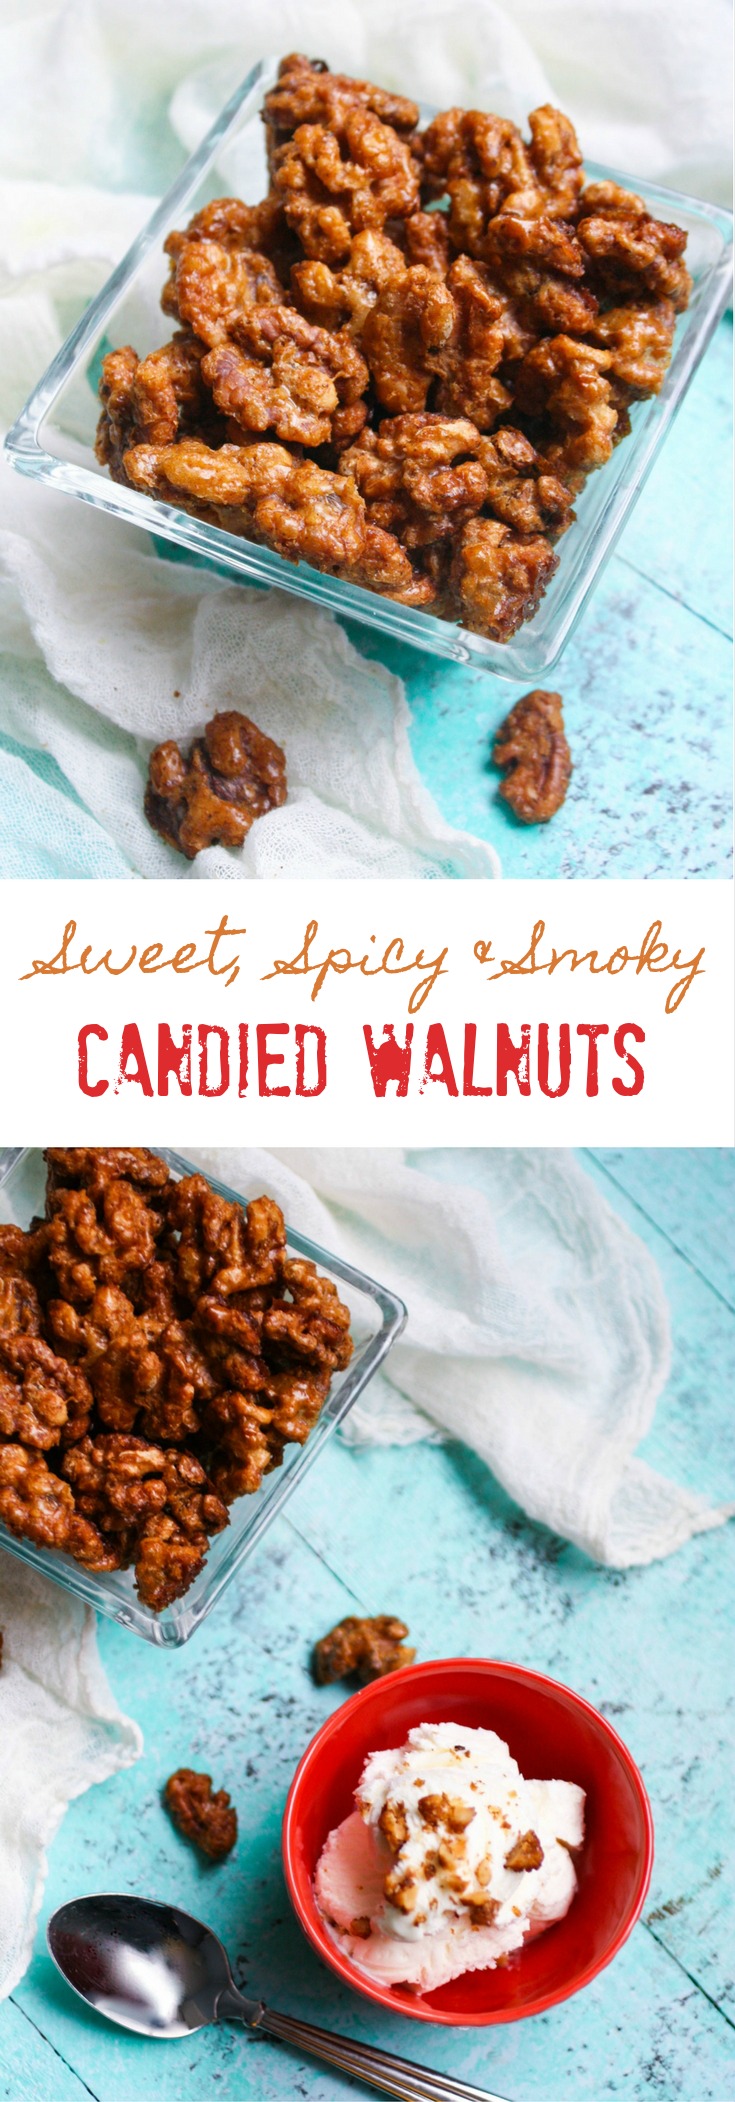 Sweet, Spicy & Smoky Candied Walnuts make a wonderful snack, and a great homemade gift to give, too. Candied walnuts are perfect over ice cream or tossed in a salad. 